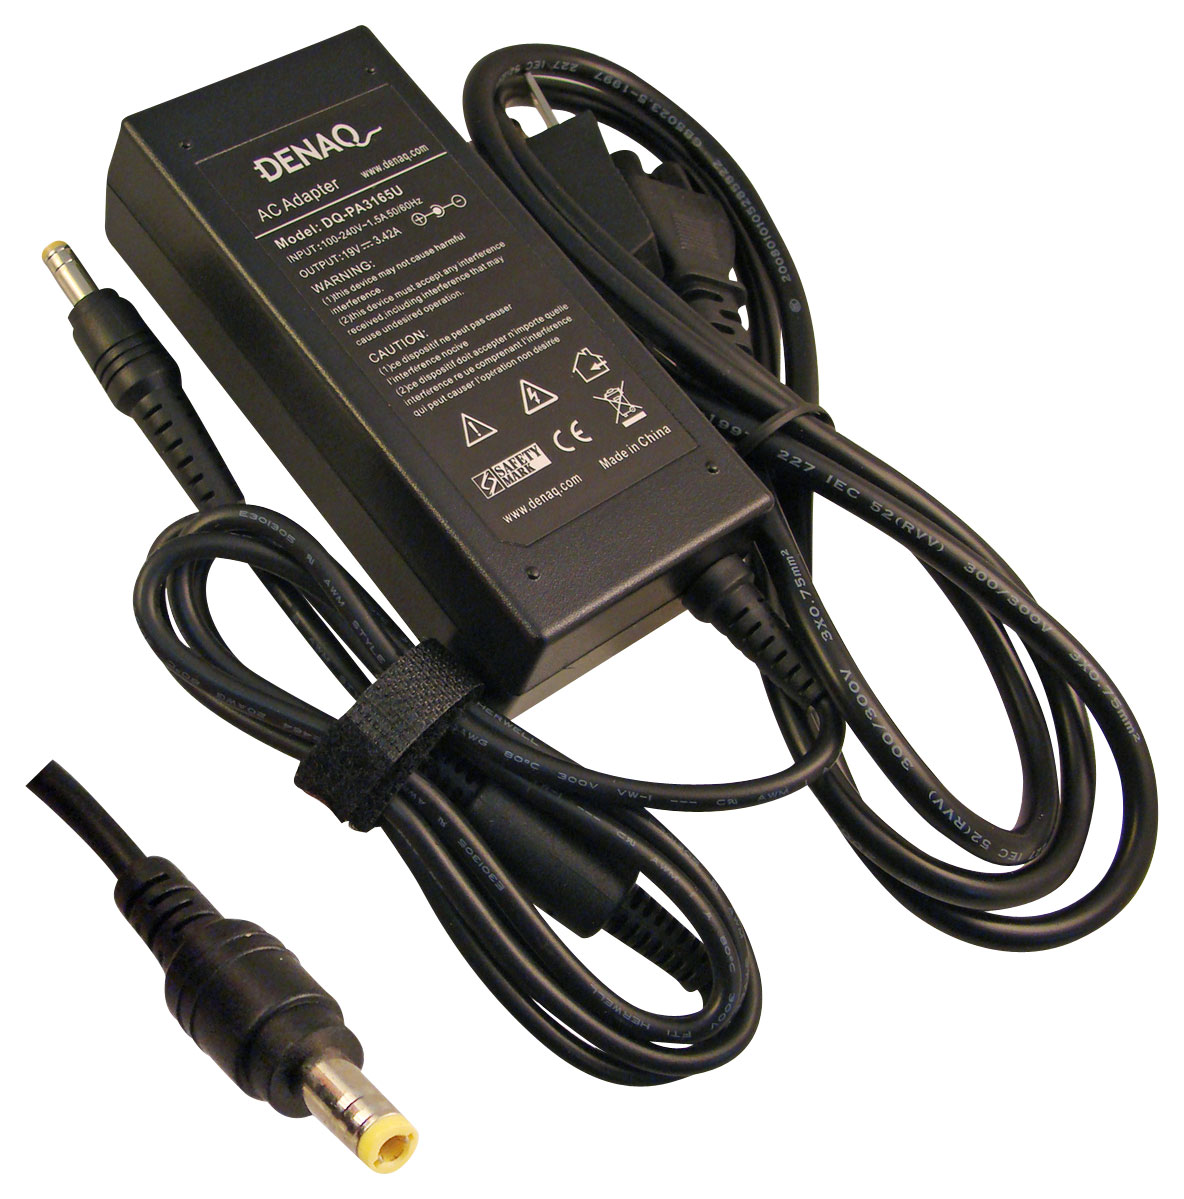 Toshiba Laptop Charger: Top Tips for Longevity & Power